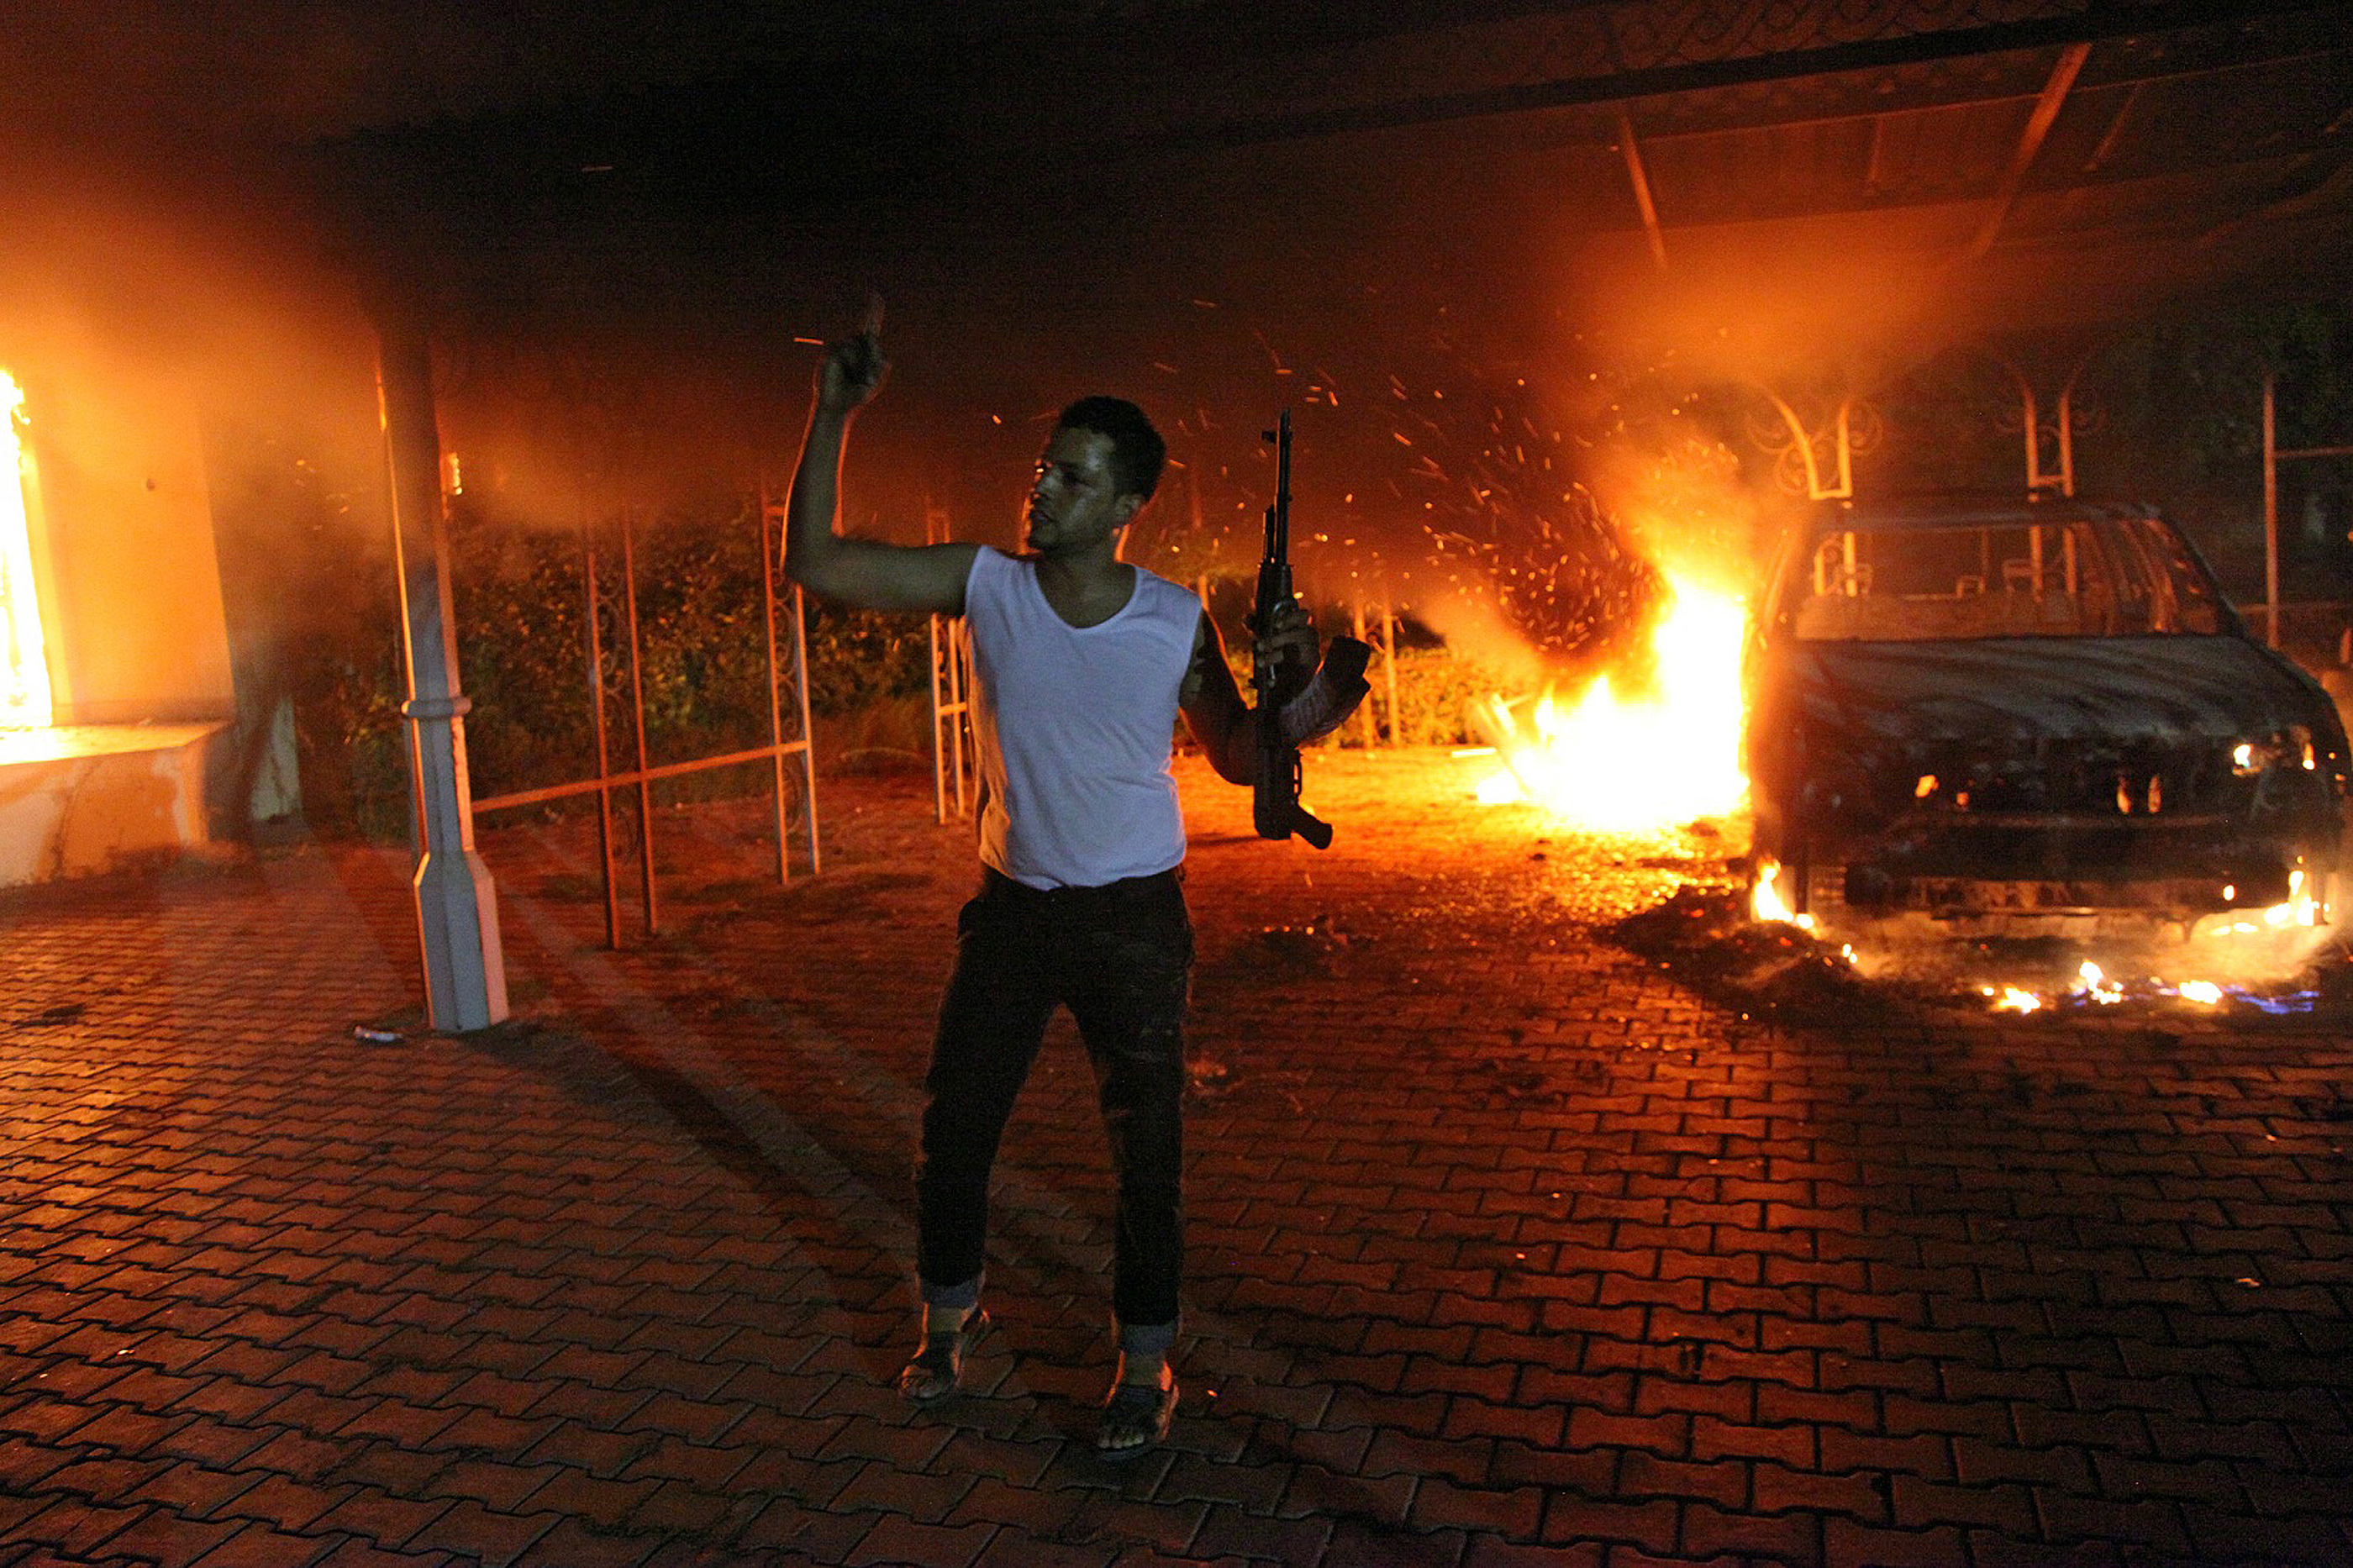 An armed man during the attack on the U.S. consulate in Benghazi on Sept. 11, 2012. (STR / AFP / Getty Images)